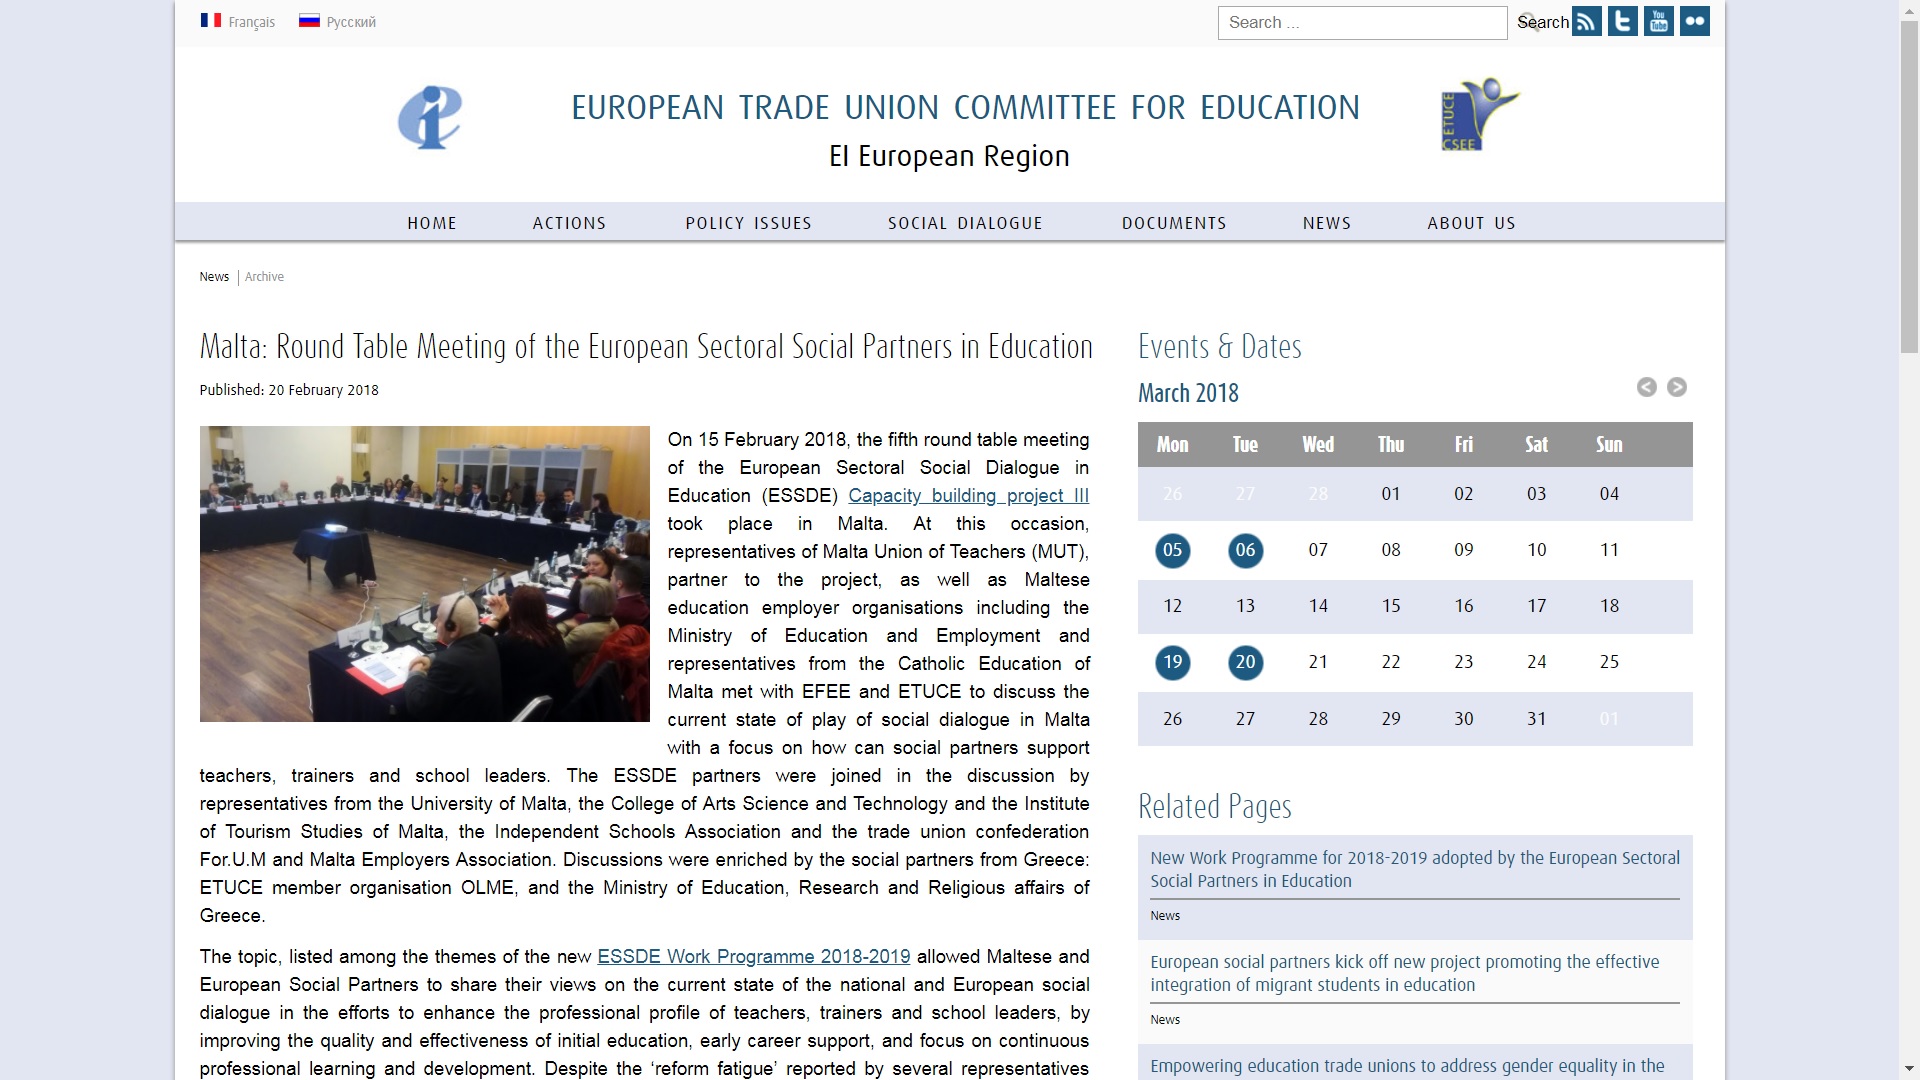 Malta: Round Table Meeting of the European Sectoral Social Partners in Education